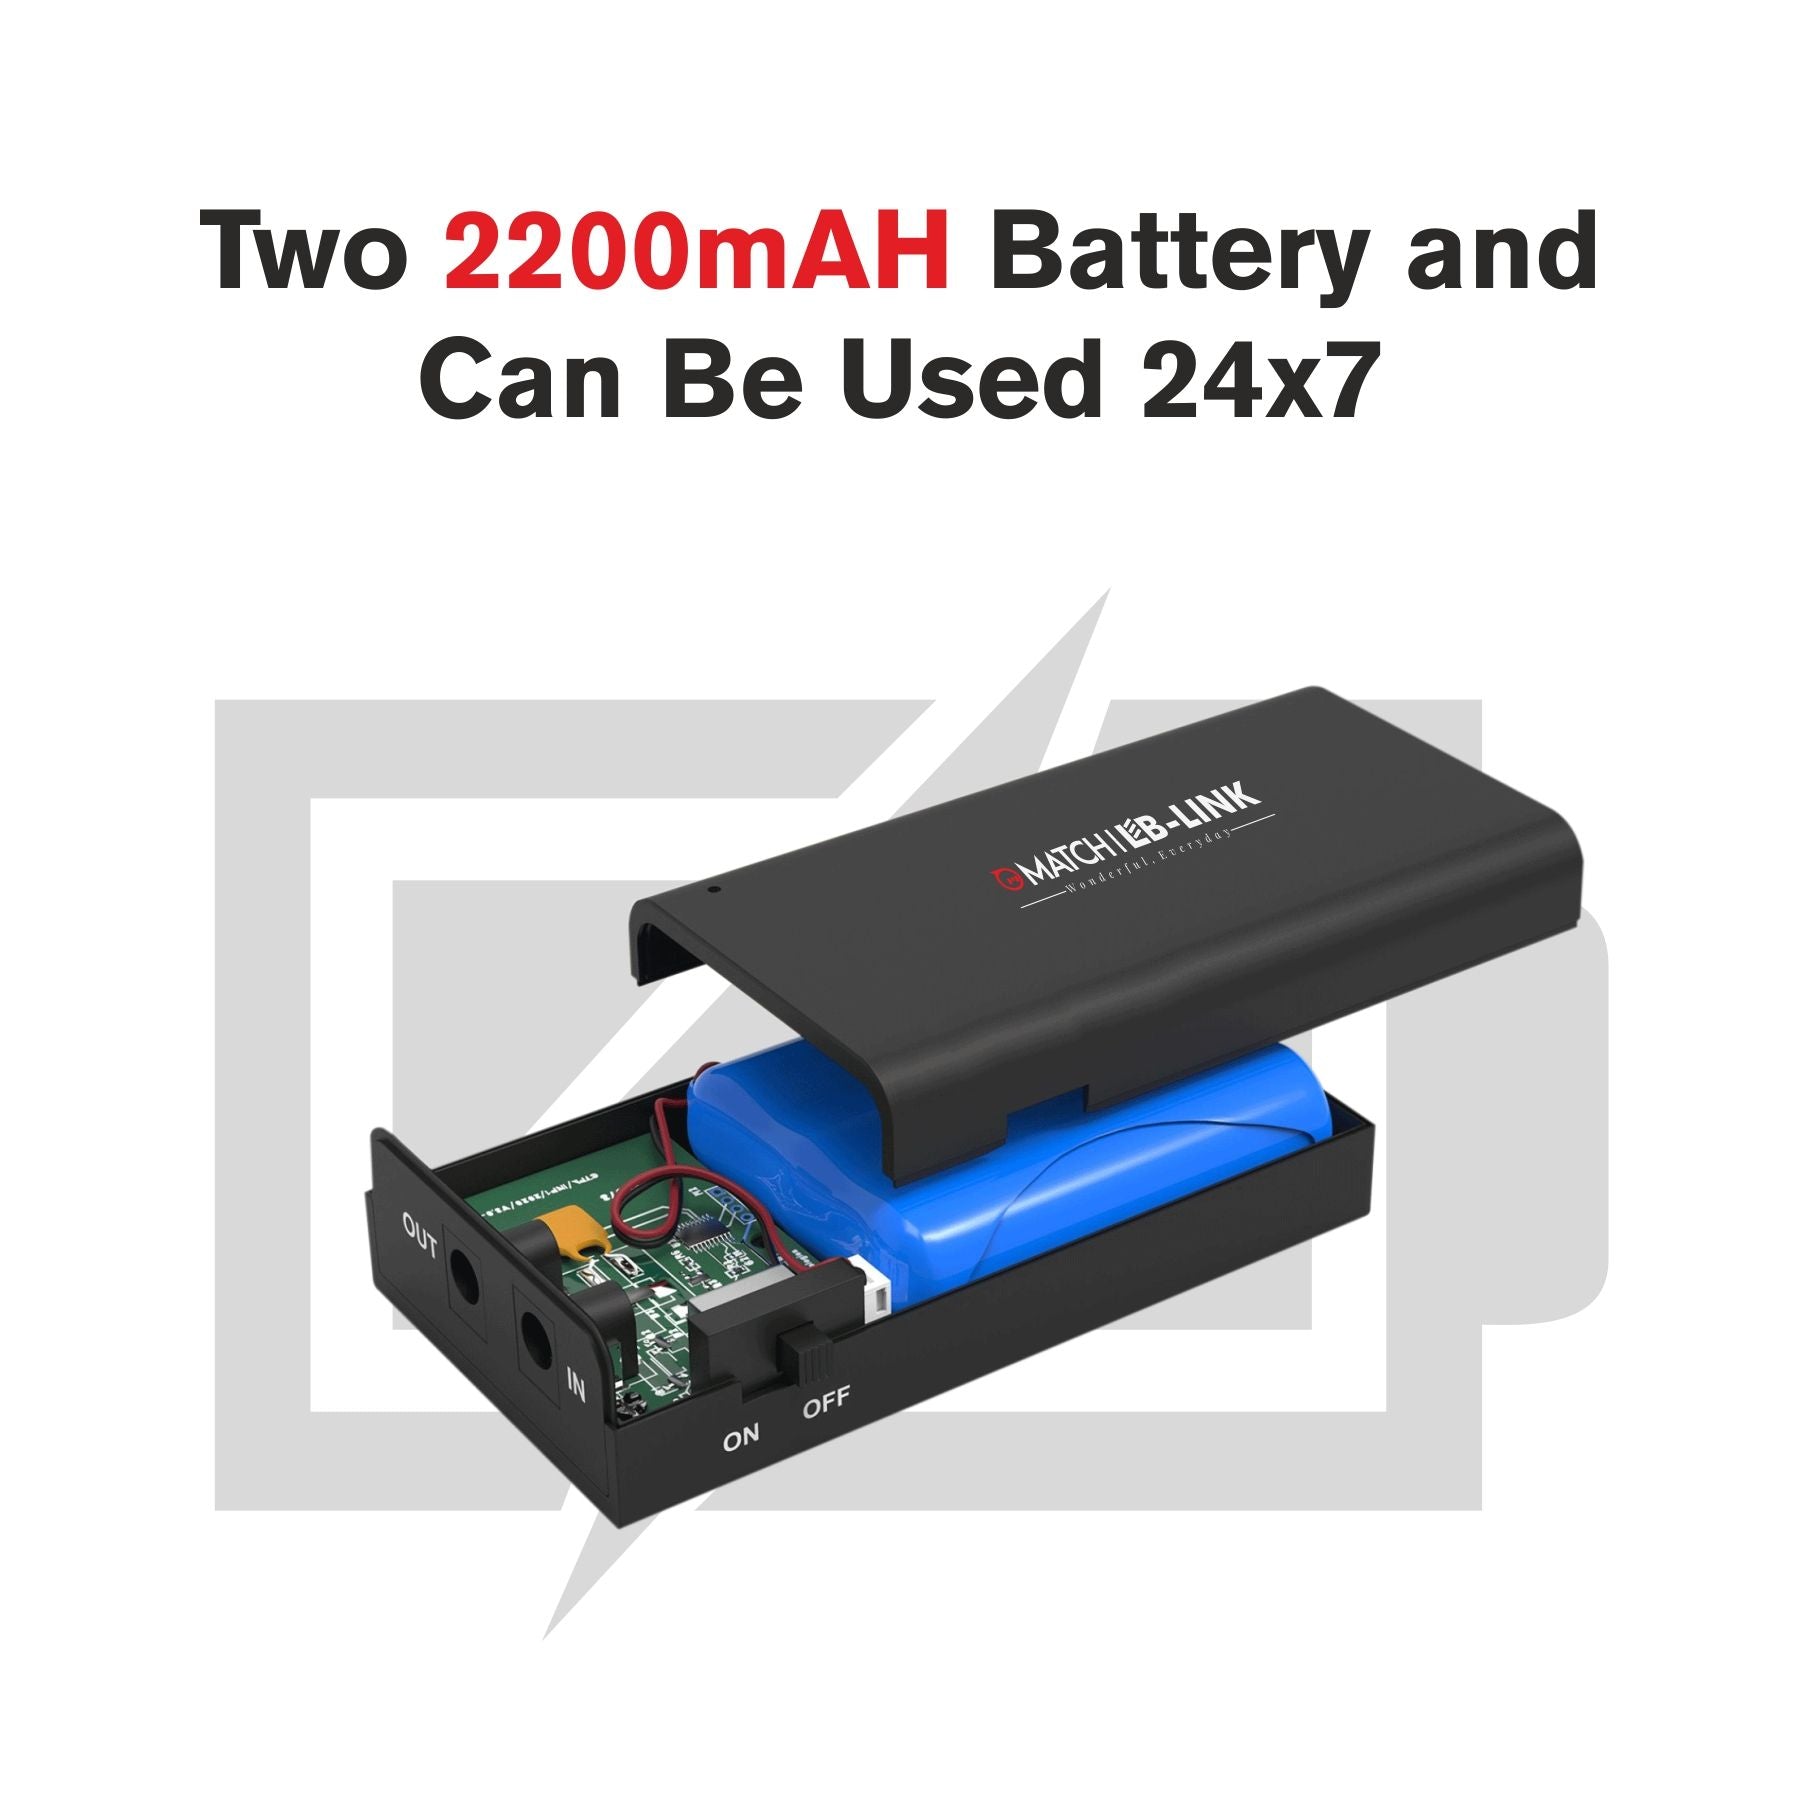 This Mini UPS has two batteries with total power of 2200mAh.